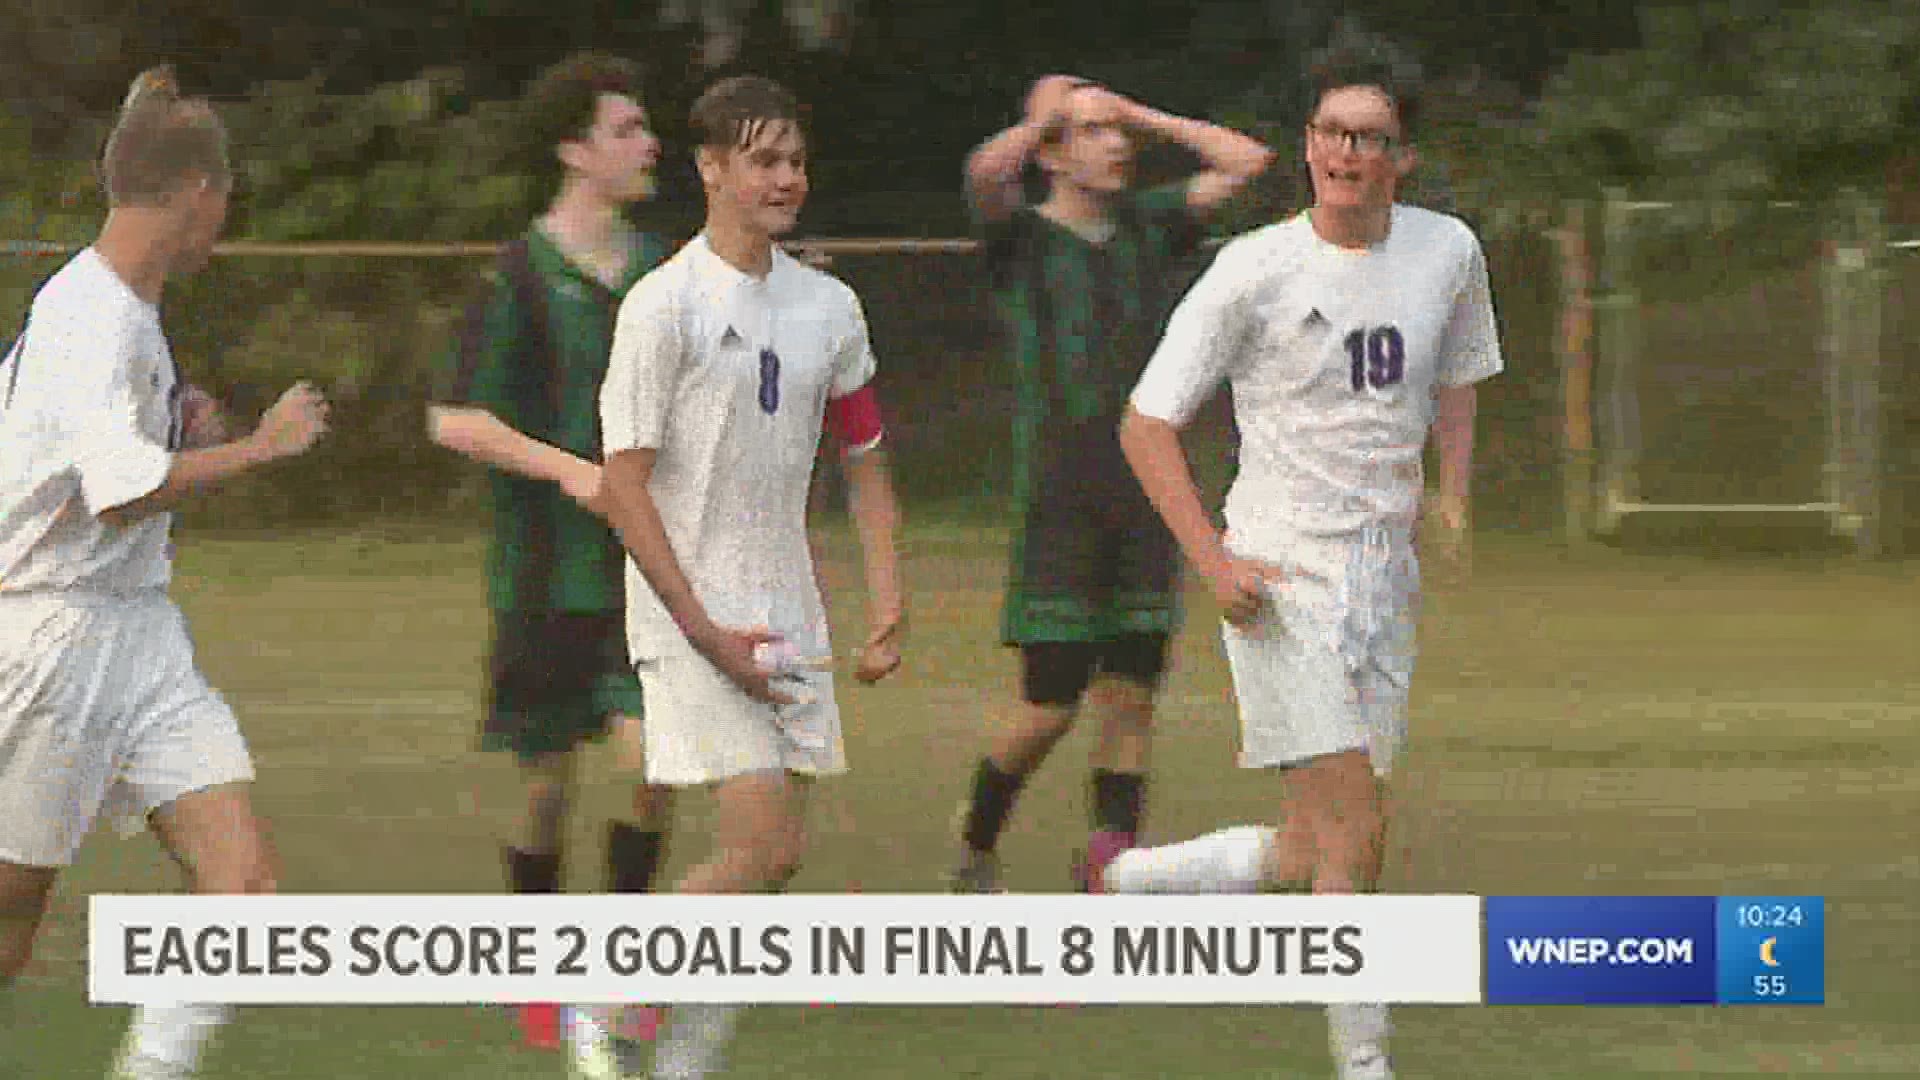 Down 1-nil with 8 minutes left, Mountain View scores twice to defeat Holy Cross in Boys HS Soccer